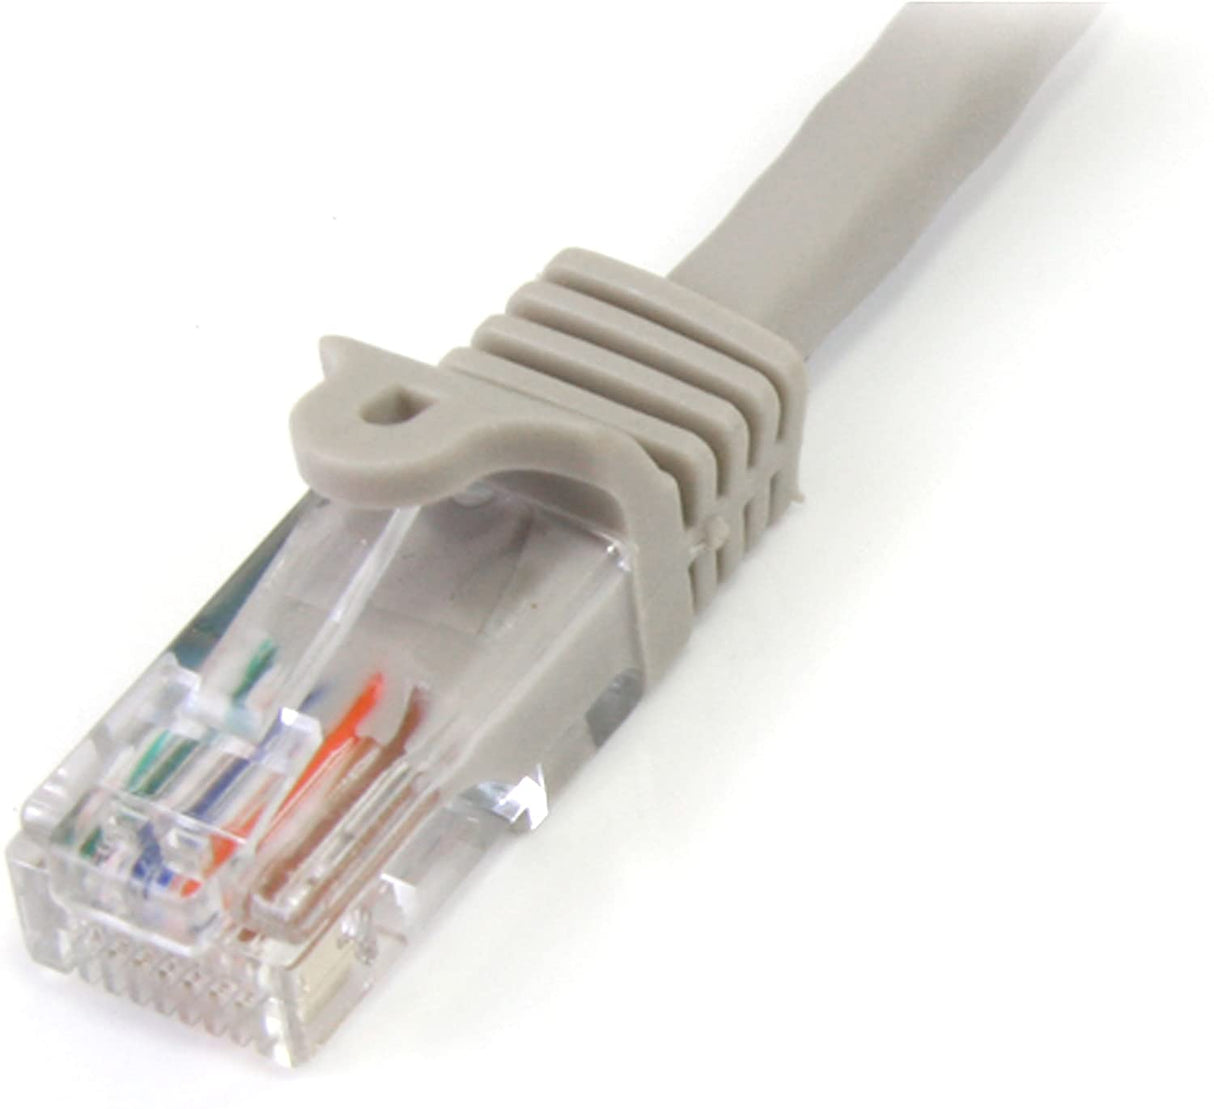 StarTech.com Cat5e Ethernet Cable - 25 ft - Gray- Patch Cable - Snagless Cat5e Cable - Long Network Cable - Ethernet Cord - Cat 5e Cable - 25ft (45PATCH25GR) 25 ft / 7.5m Grey